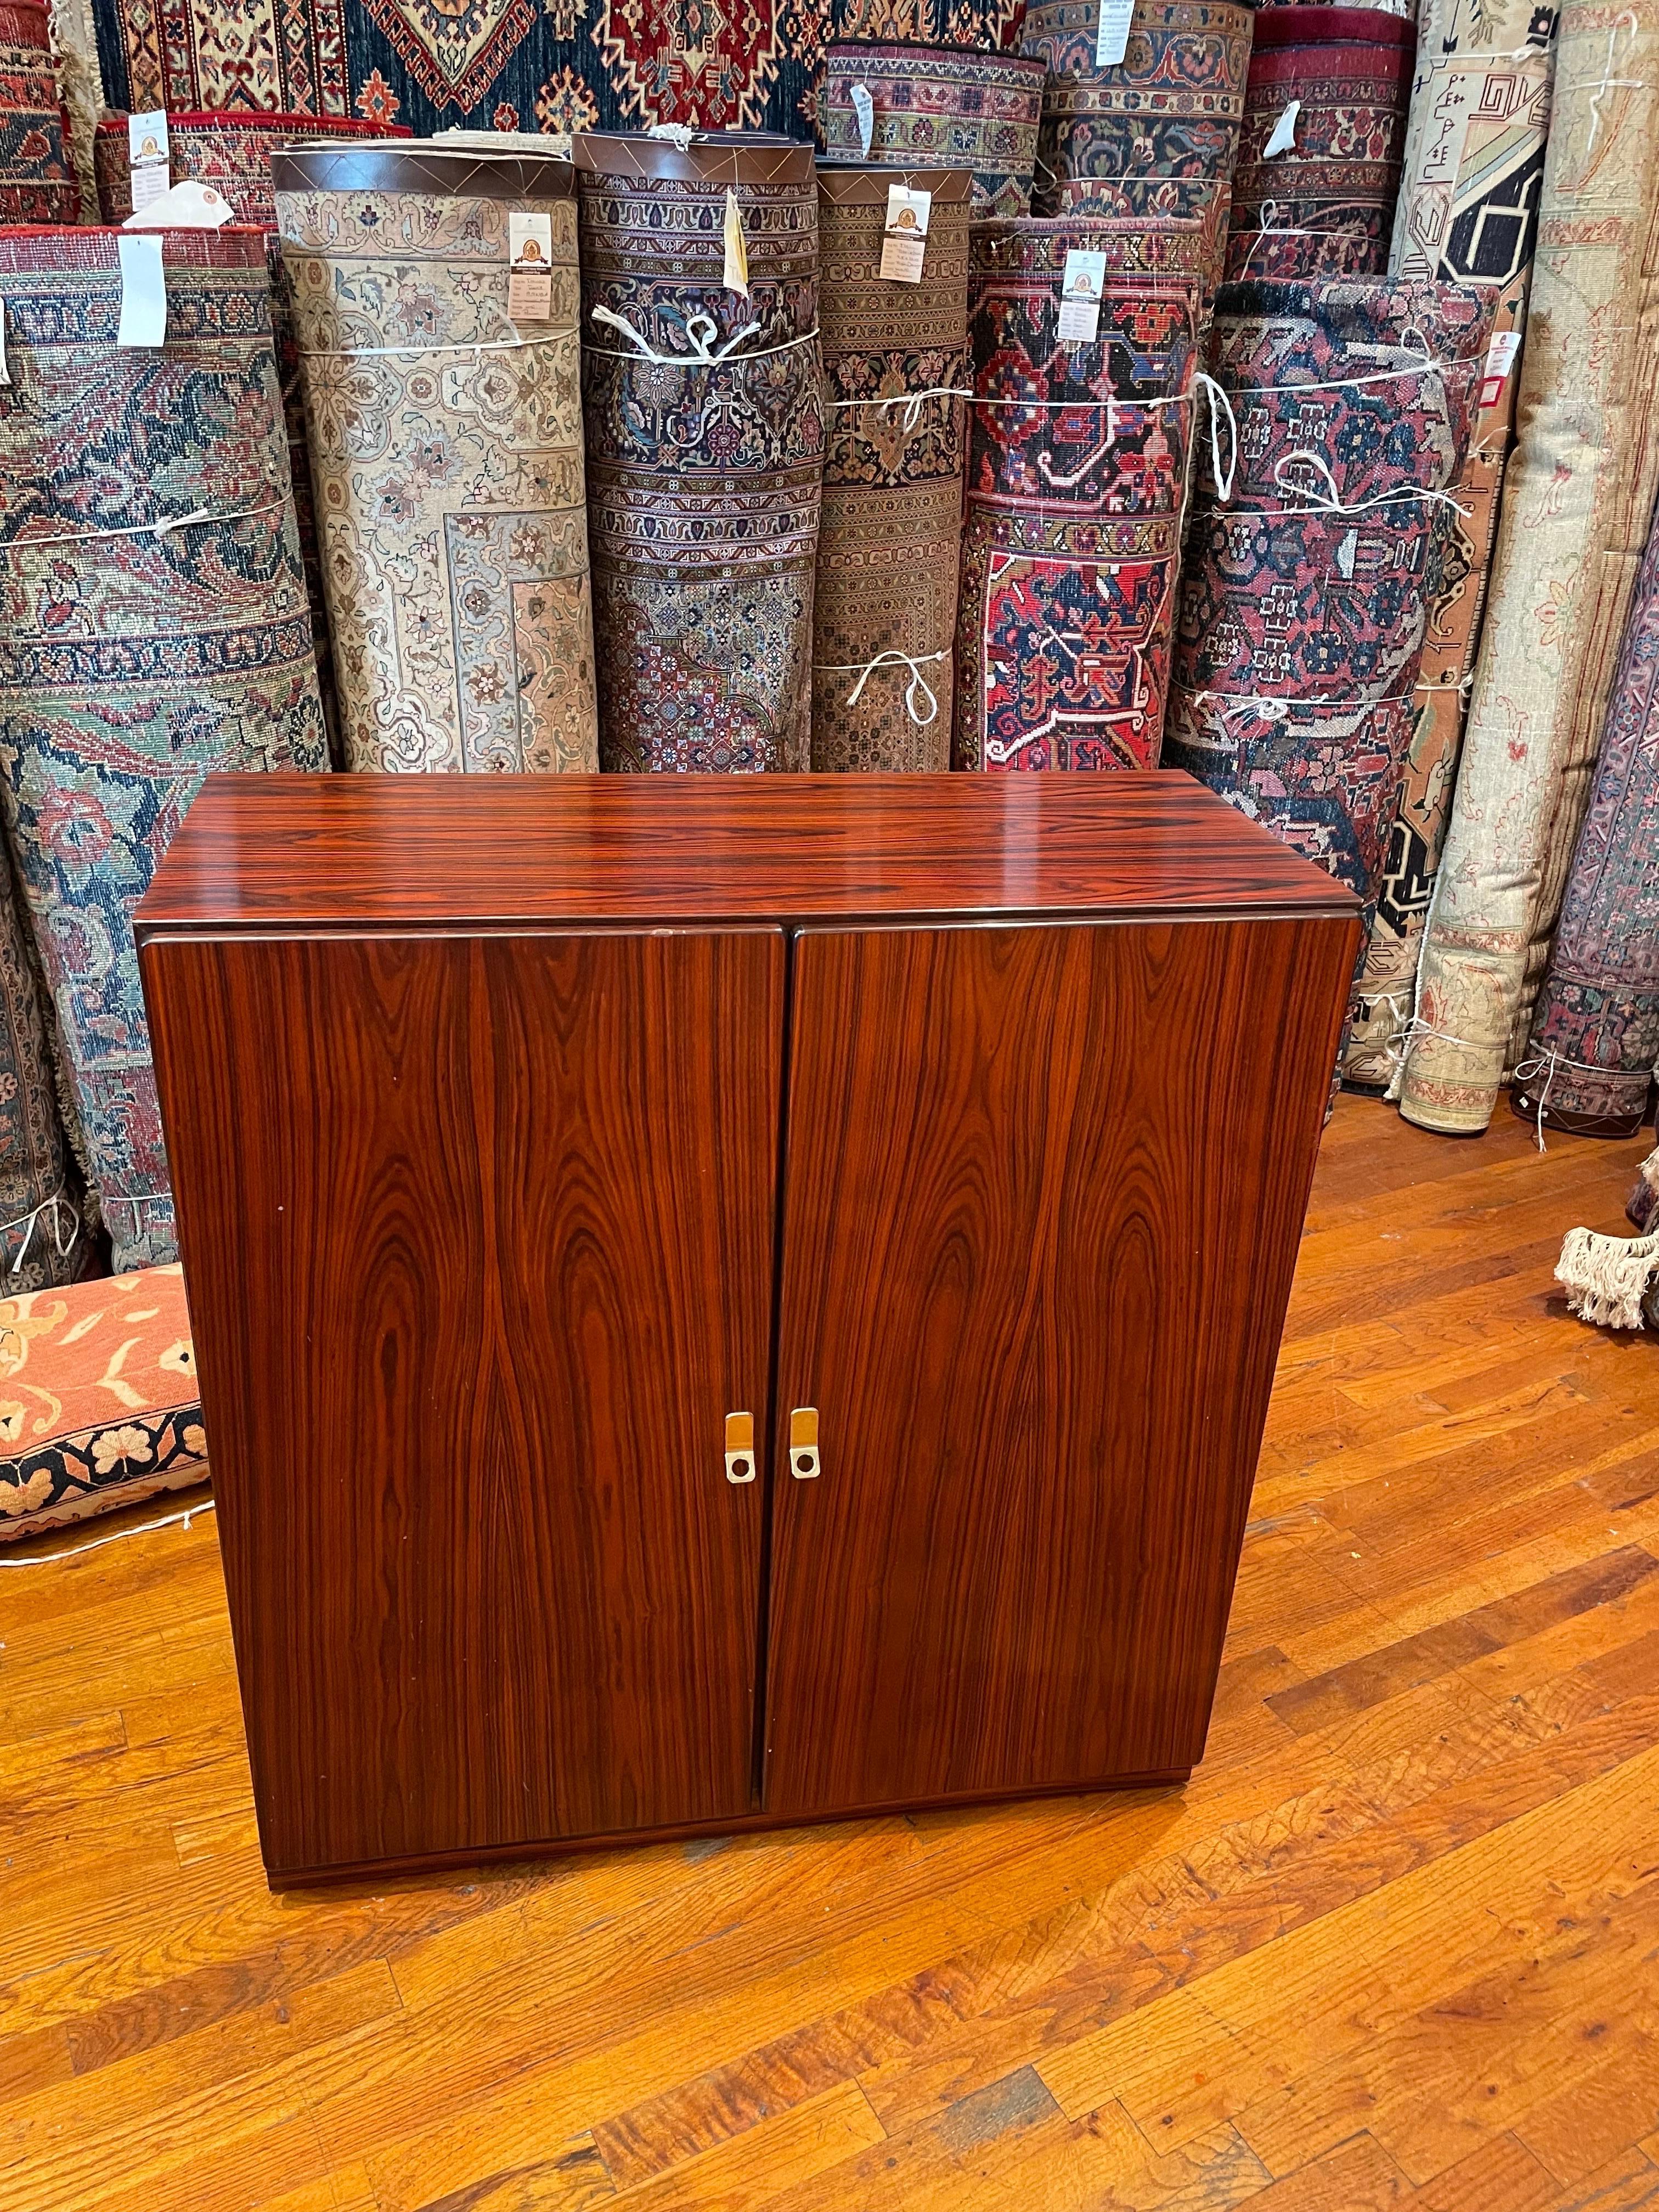 Great pair of versatile Danish modern rosewood cabinets circa 1980's, great size and very clean original condition, nice polished brass handles, the buyer has the option to buy 1 or 2.